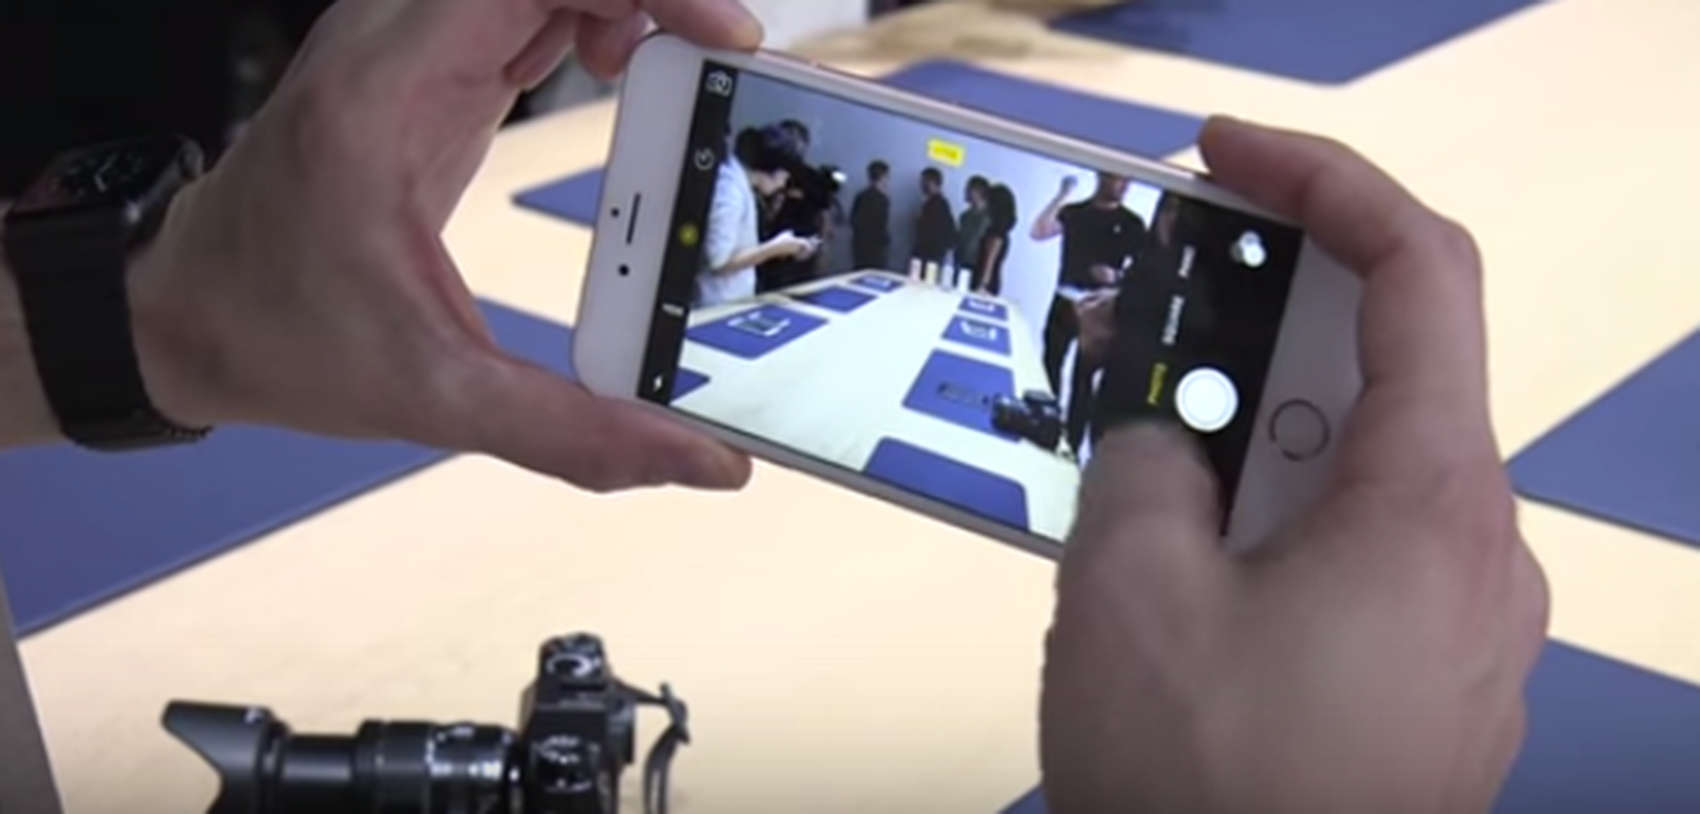 The new iPhone 6s in the hands of journalist during Apple's September event Wednesday.